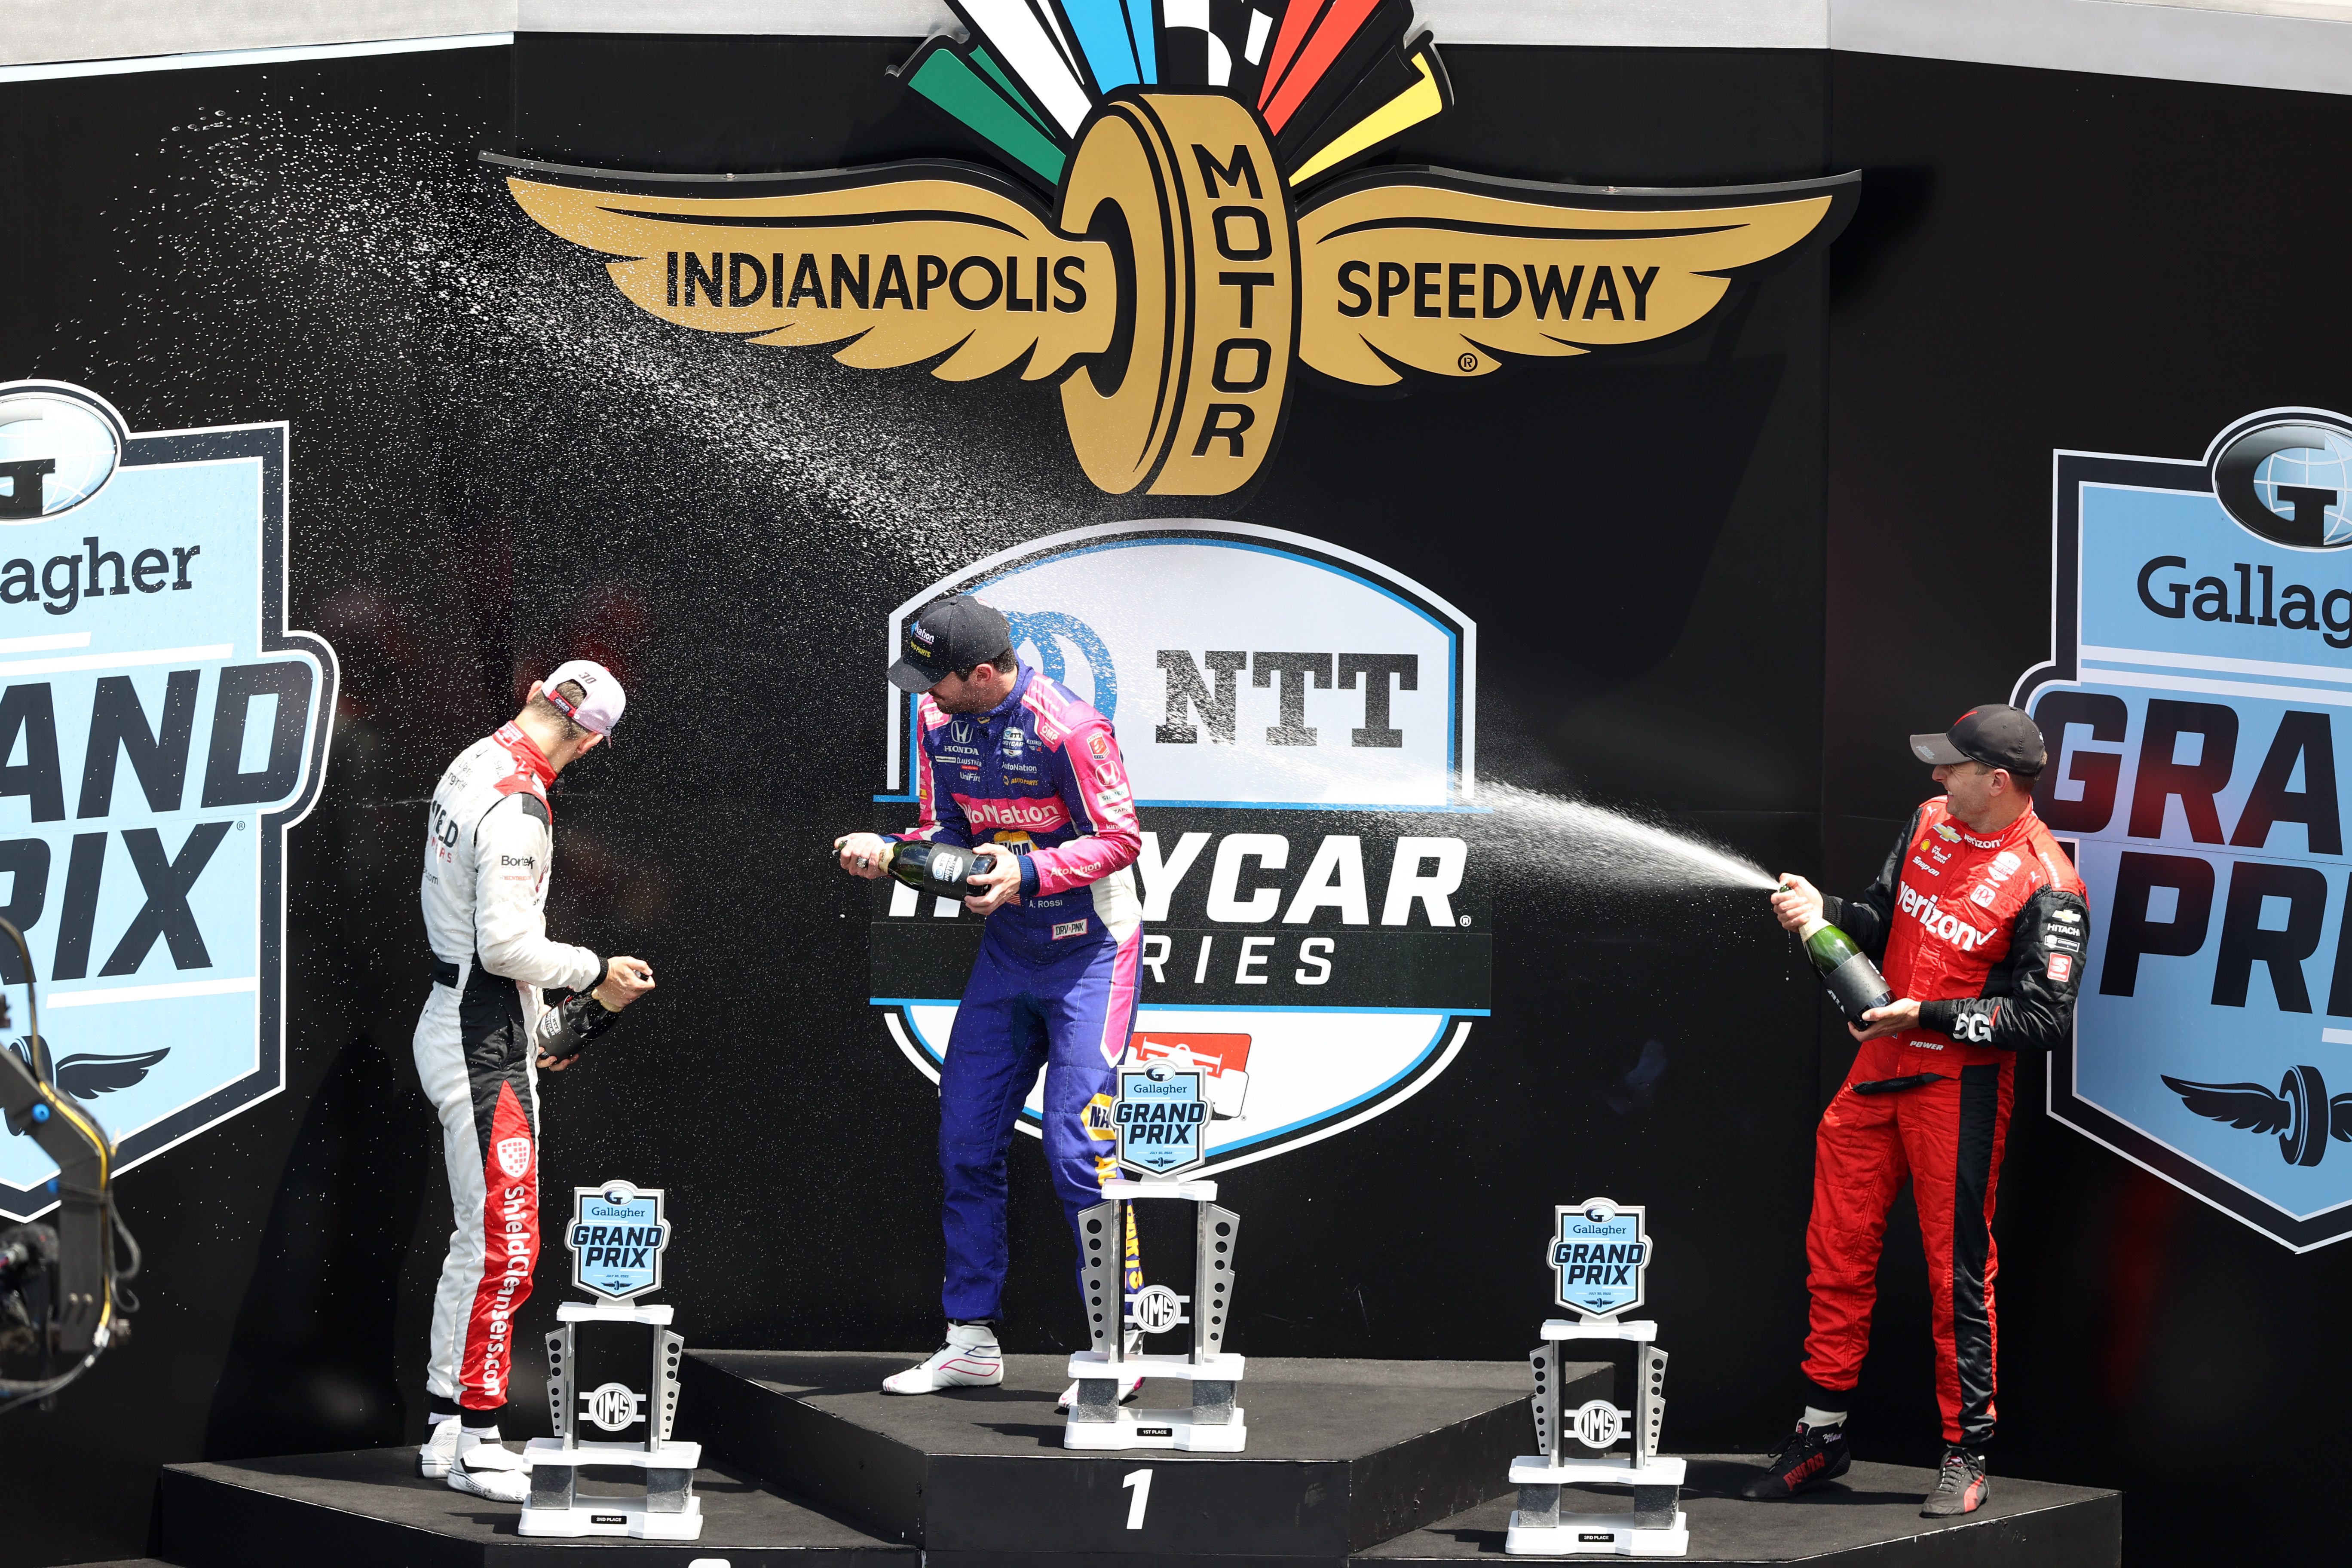 Christian Lundgaard (from left), Alexander Rossi and Will Power celebrate on the podium at Indianapolis Motor Speedway